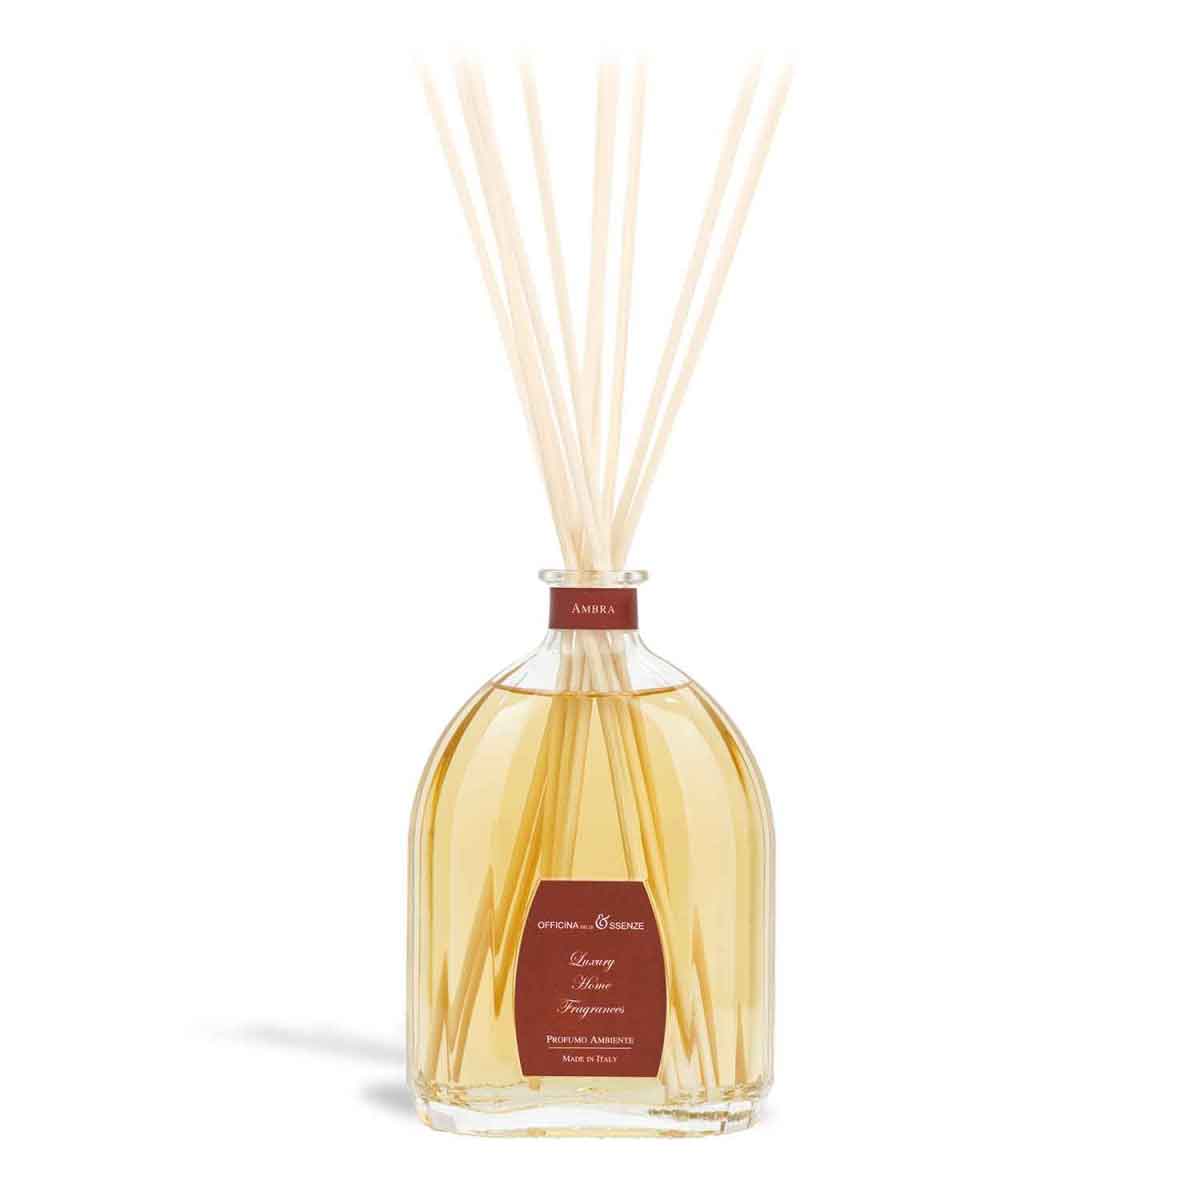 Amber home fragrance with reeds